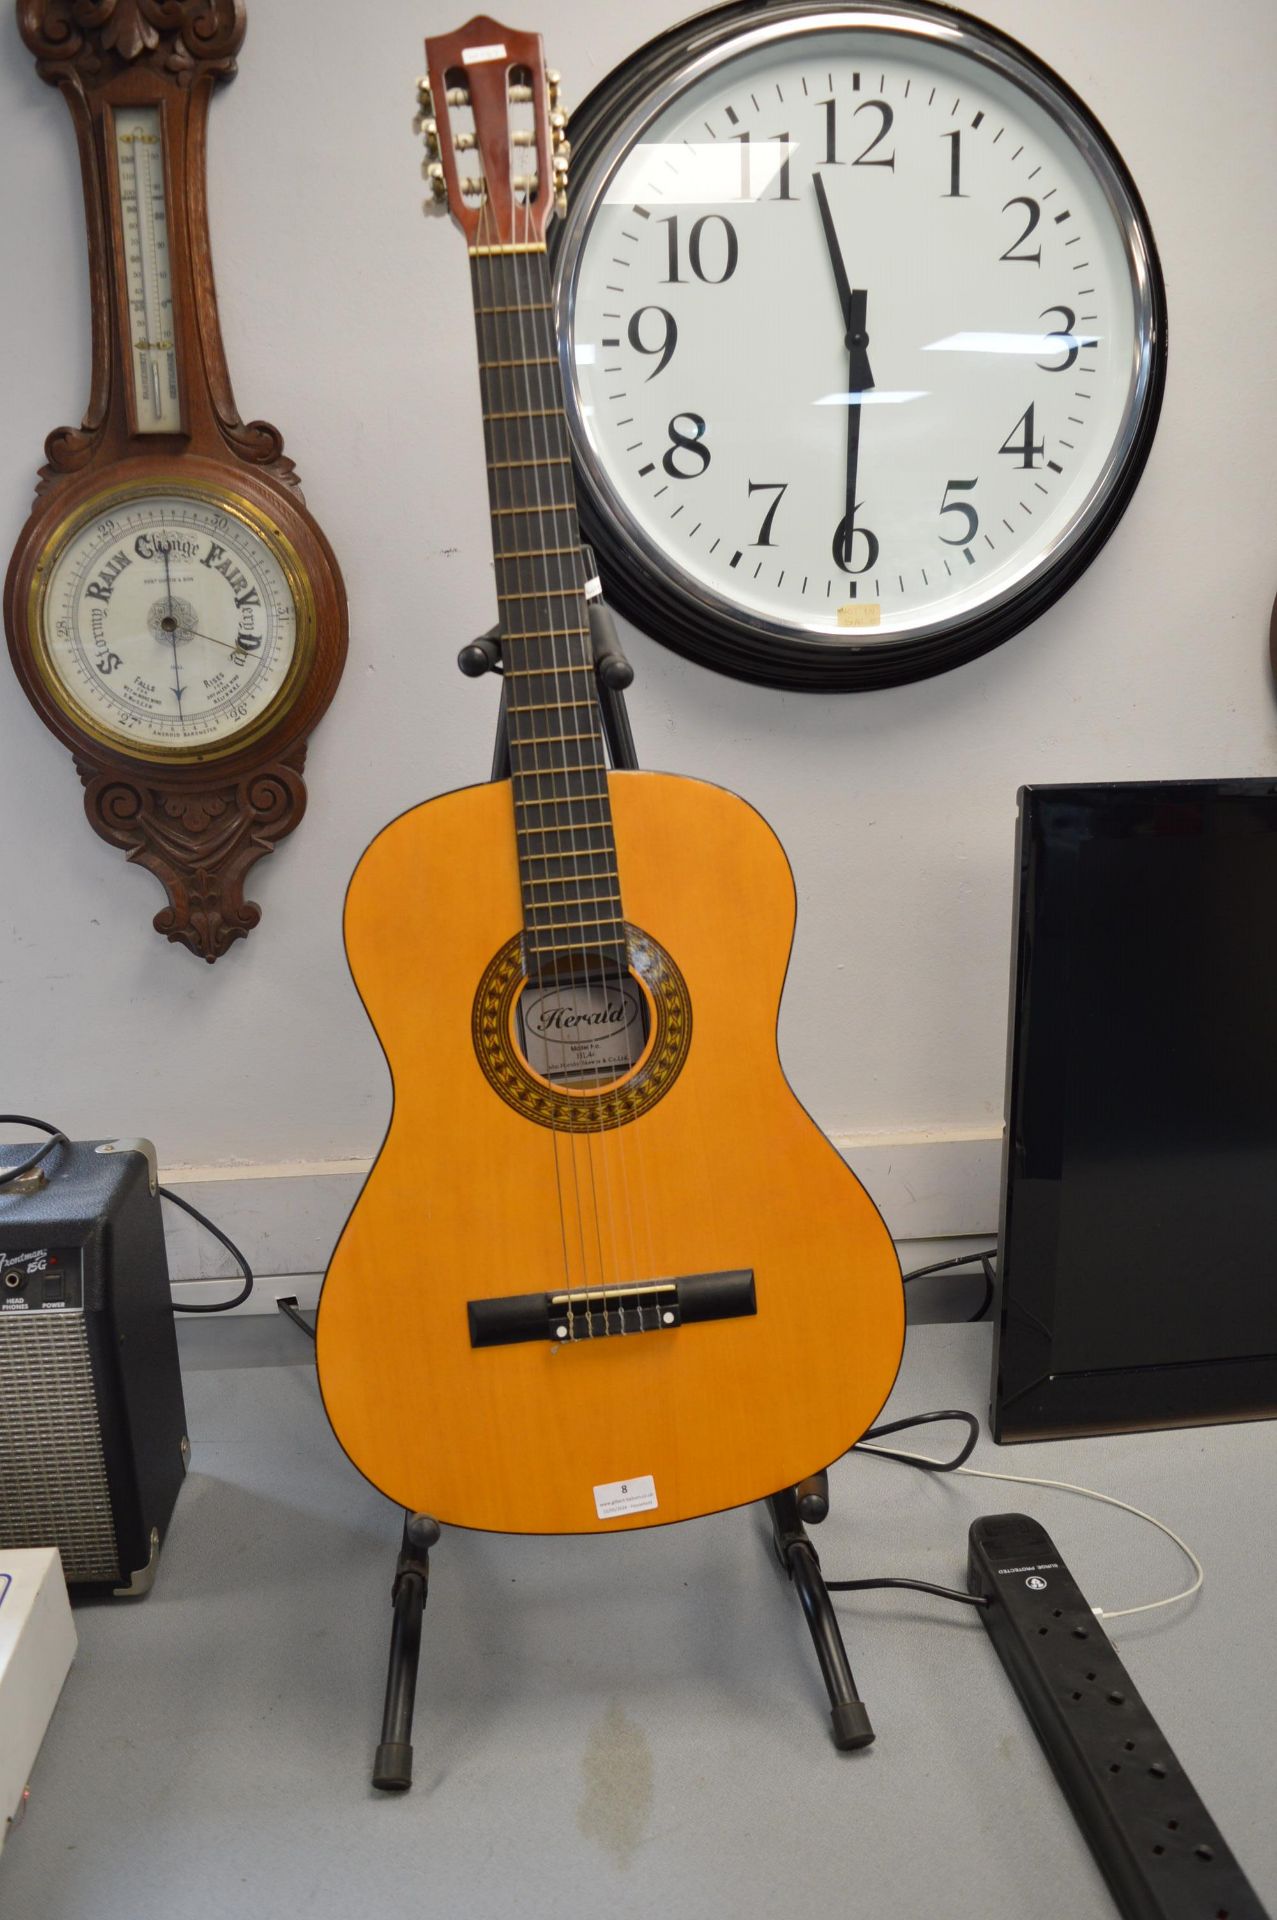 Herald Acoustic Guitar HO44 Manufactured by John Hornby Skewes with Stand